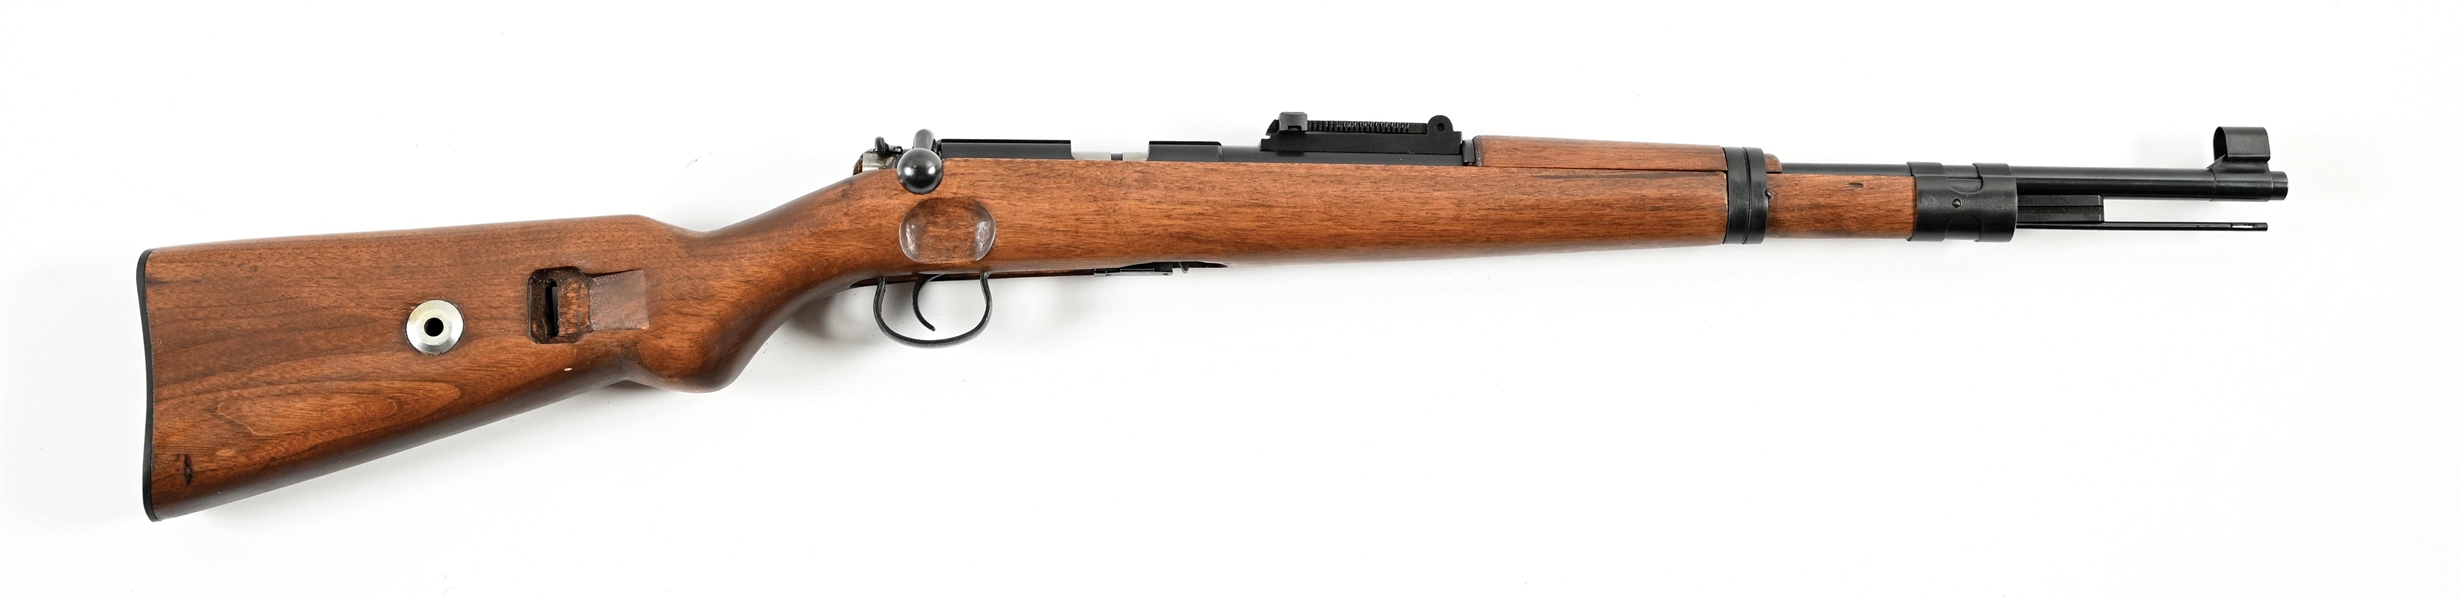 (M) CHINESE MADE TU-33/40 MAUSER STYLE .22 BOLT ACTION RIFLE.